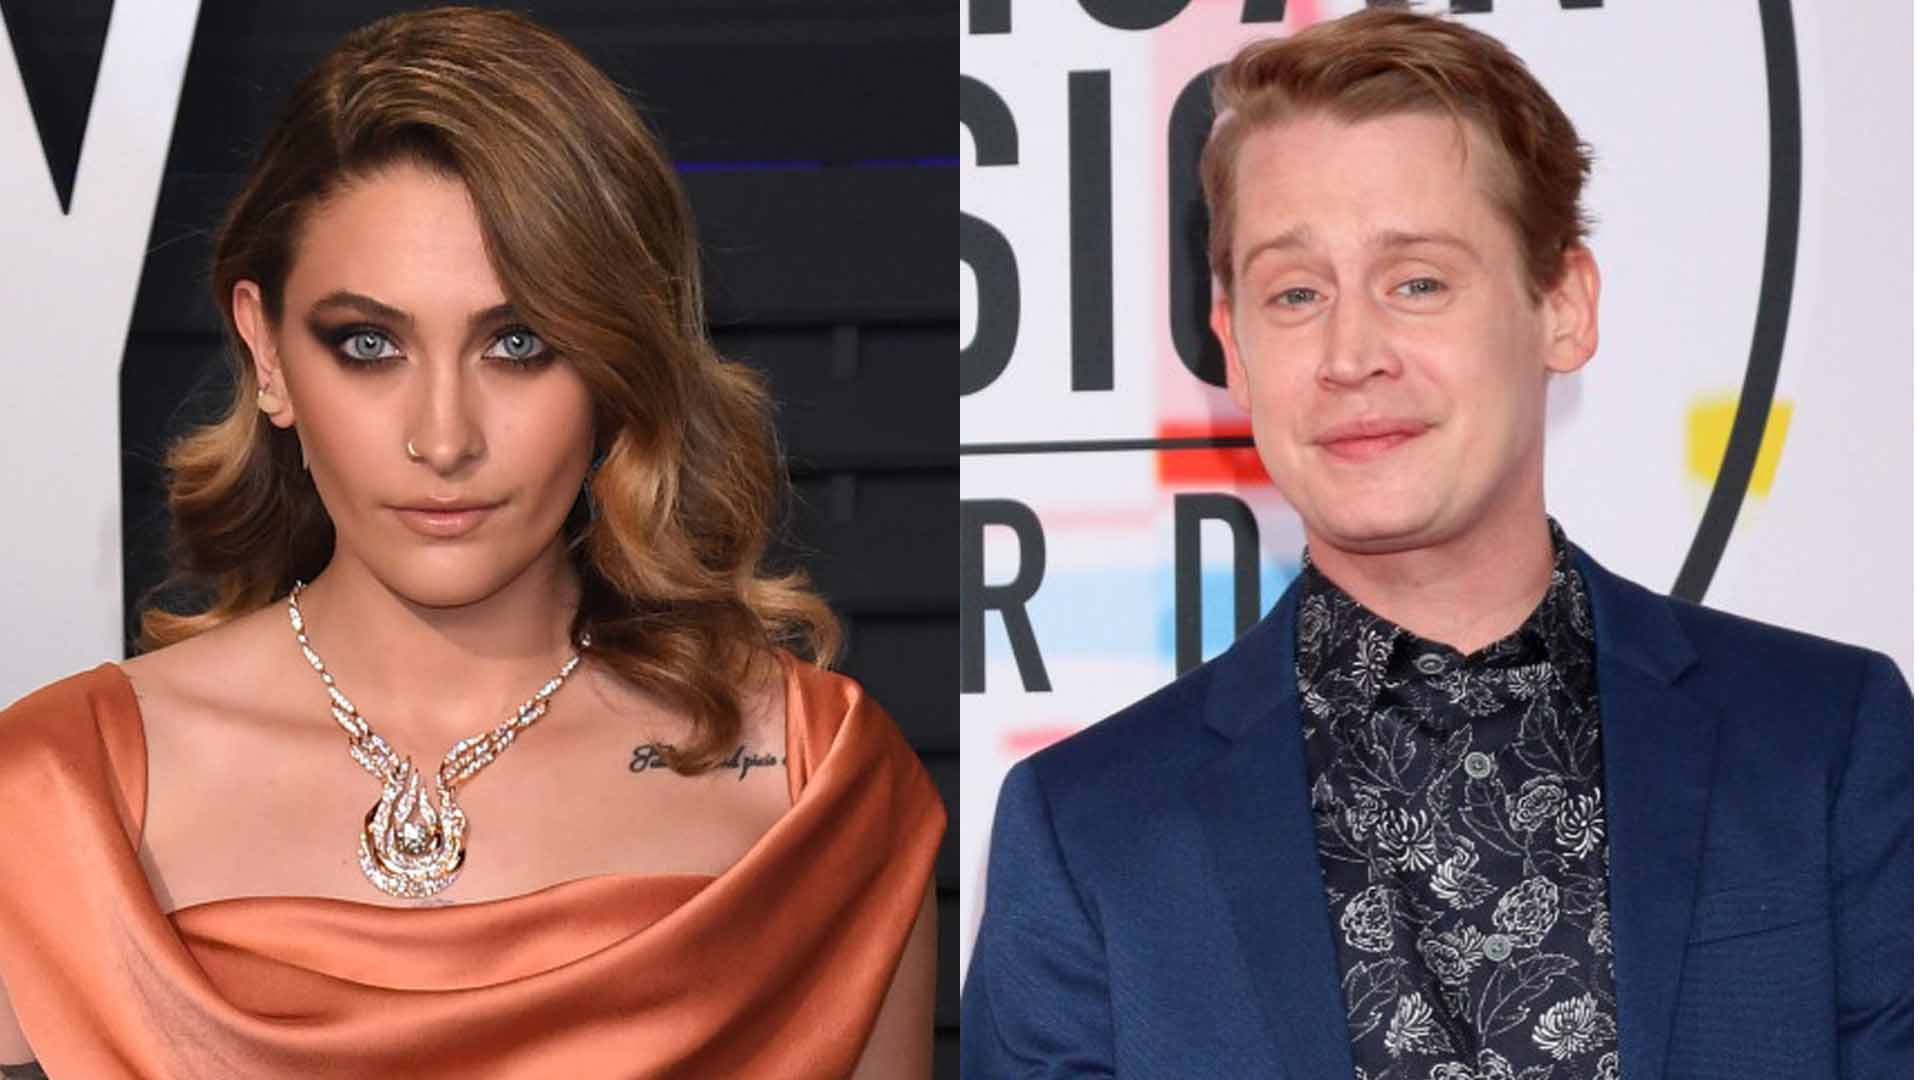 Paris Jackson Says Godfather Macaulay Culkin’s Acting Tips Helped Her Land American Horror Stories Role: “Overact And Make It Theatrical”